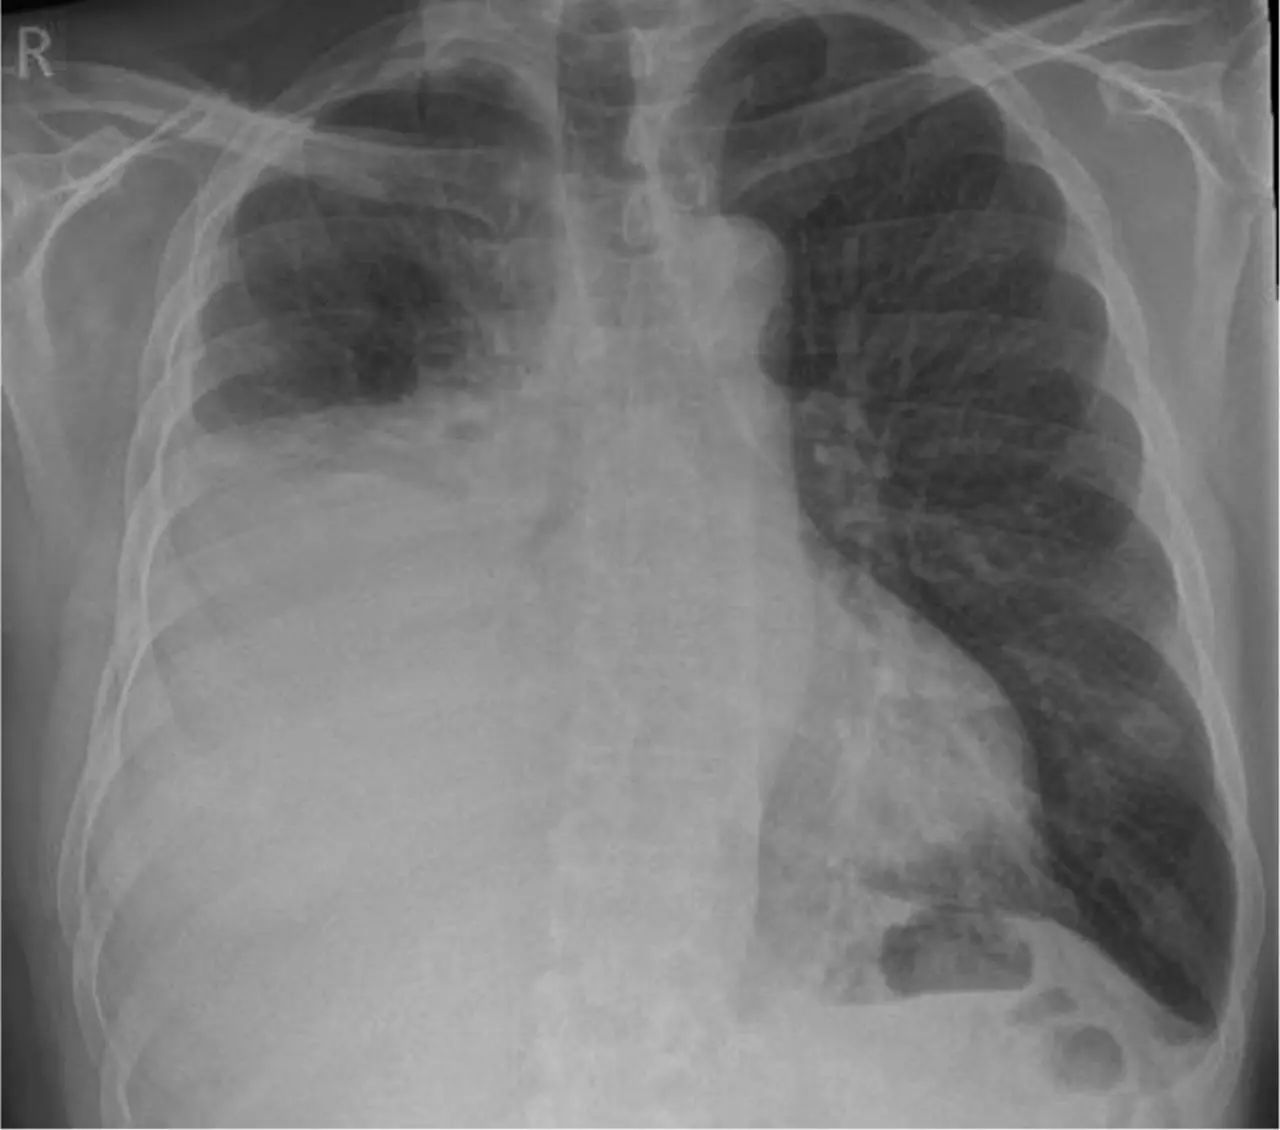 Modern Approach For Unilateral Pleural Effusion: Case study